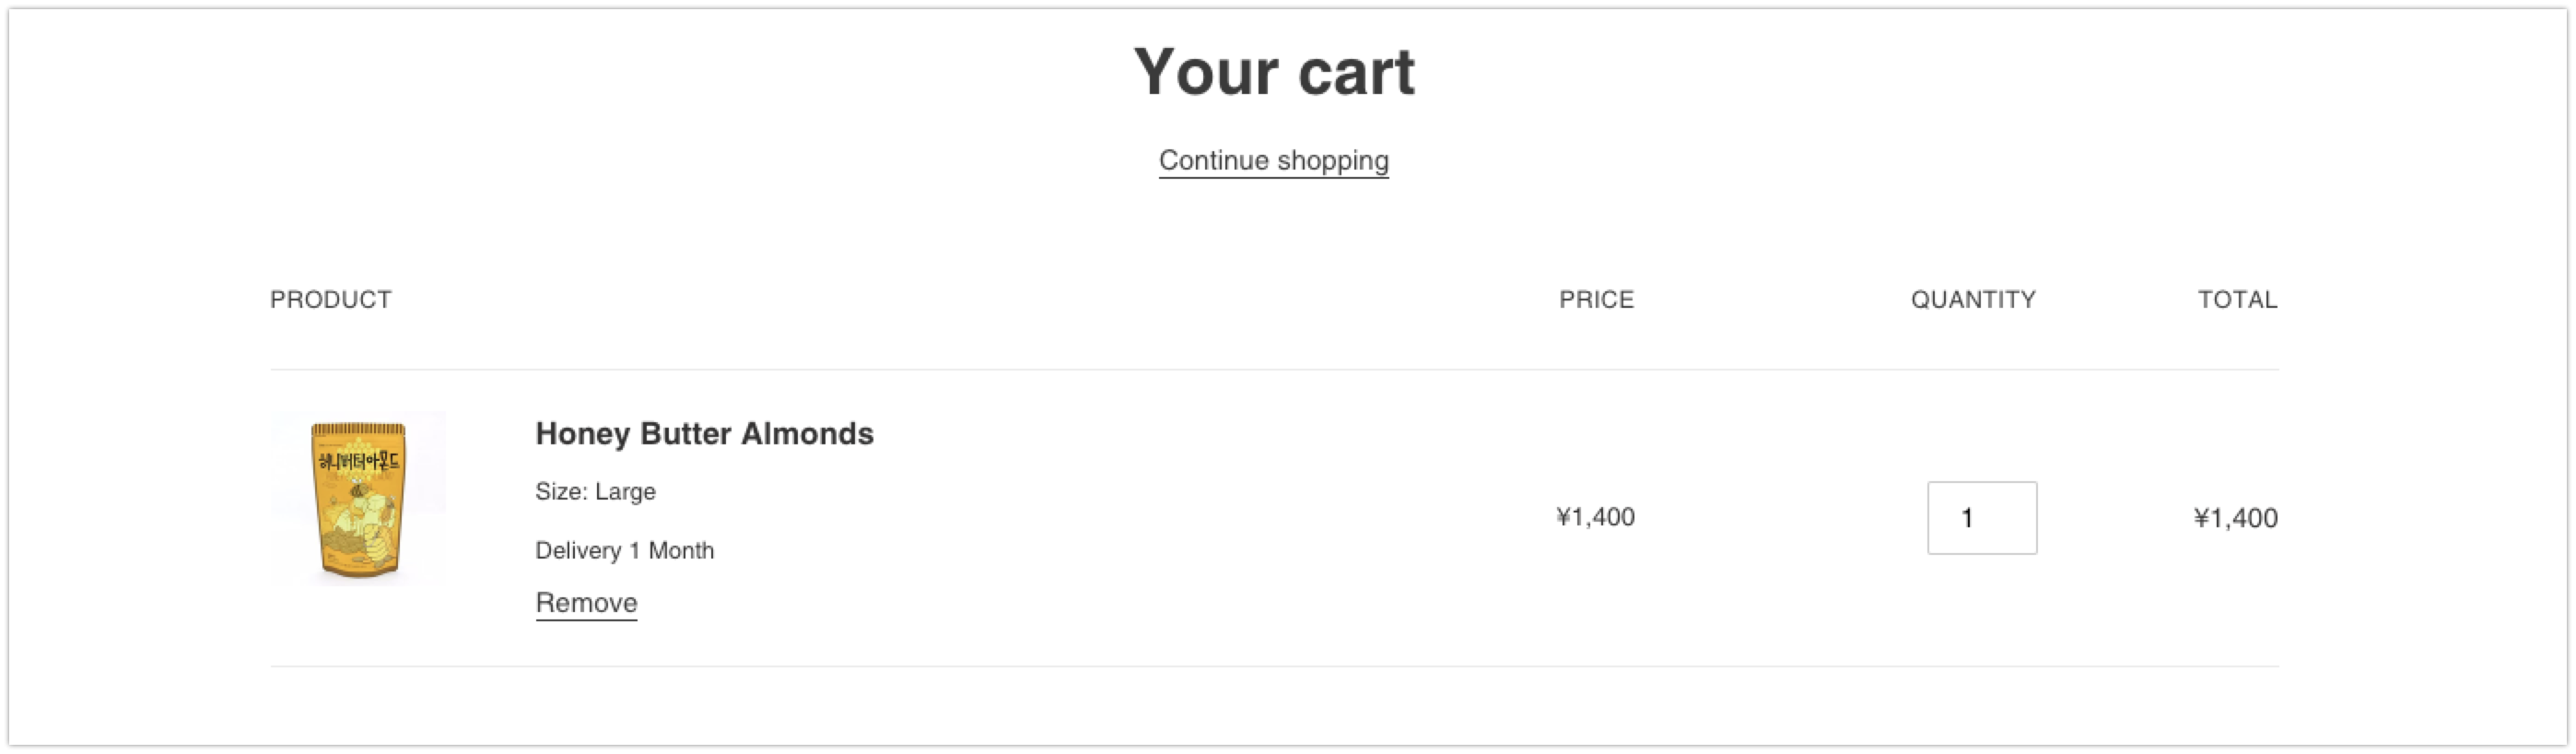 Your Shopping Cart – A Million Almonds 2023-09-27 16-02-11.png